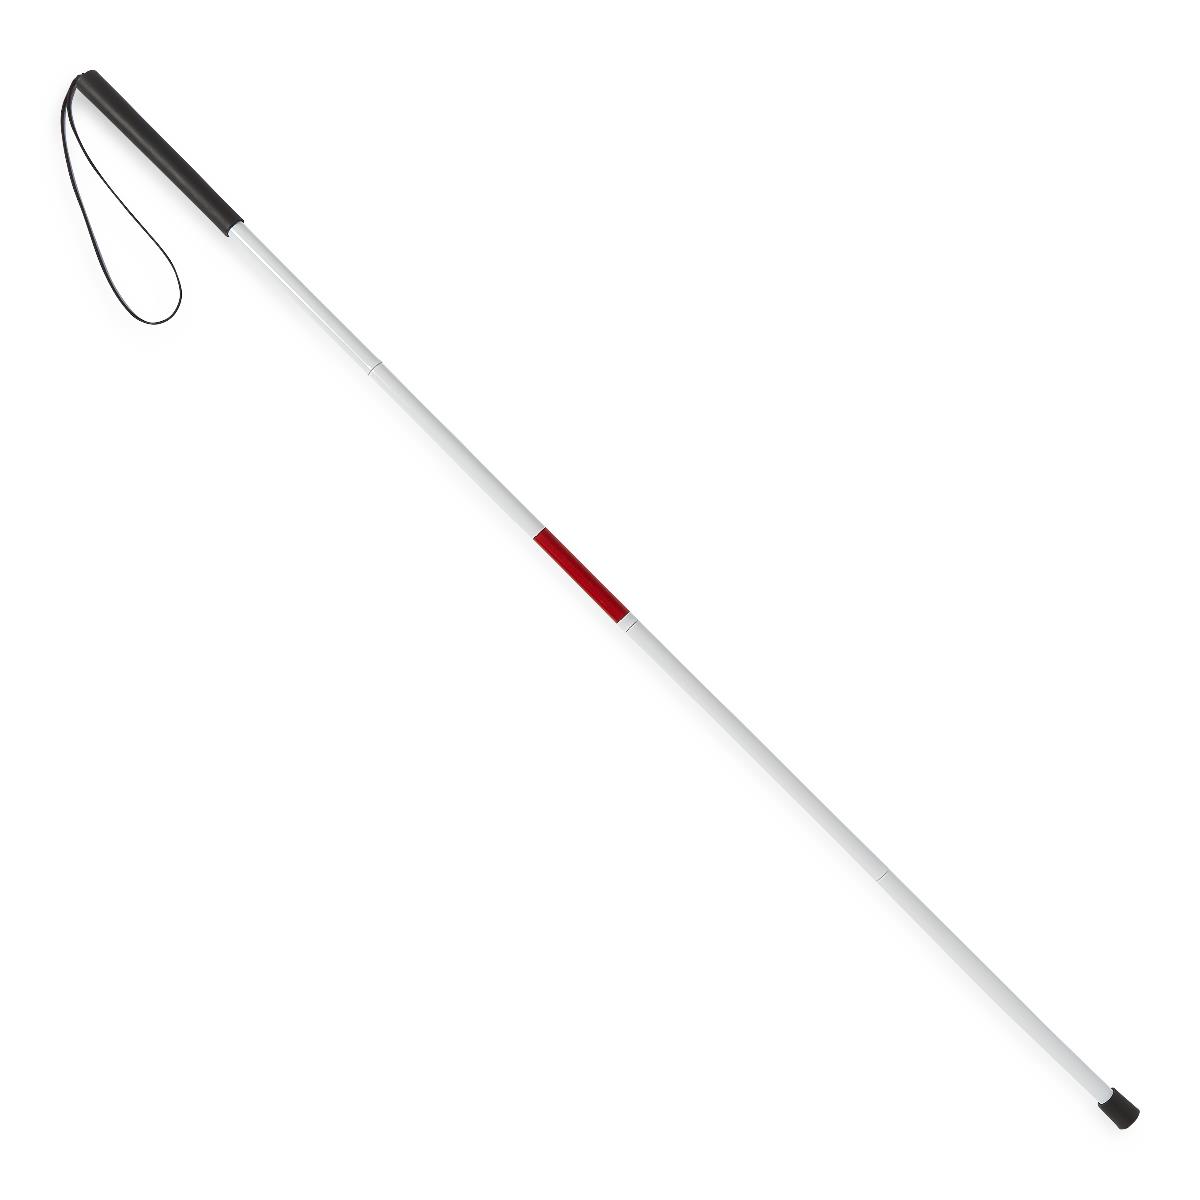 White cane - All medical device manufacturers